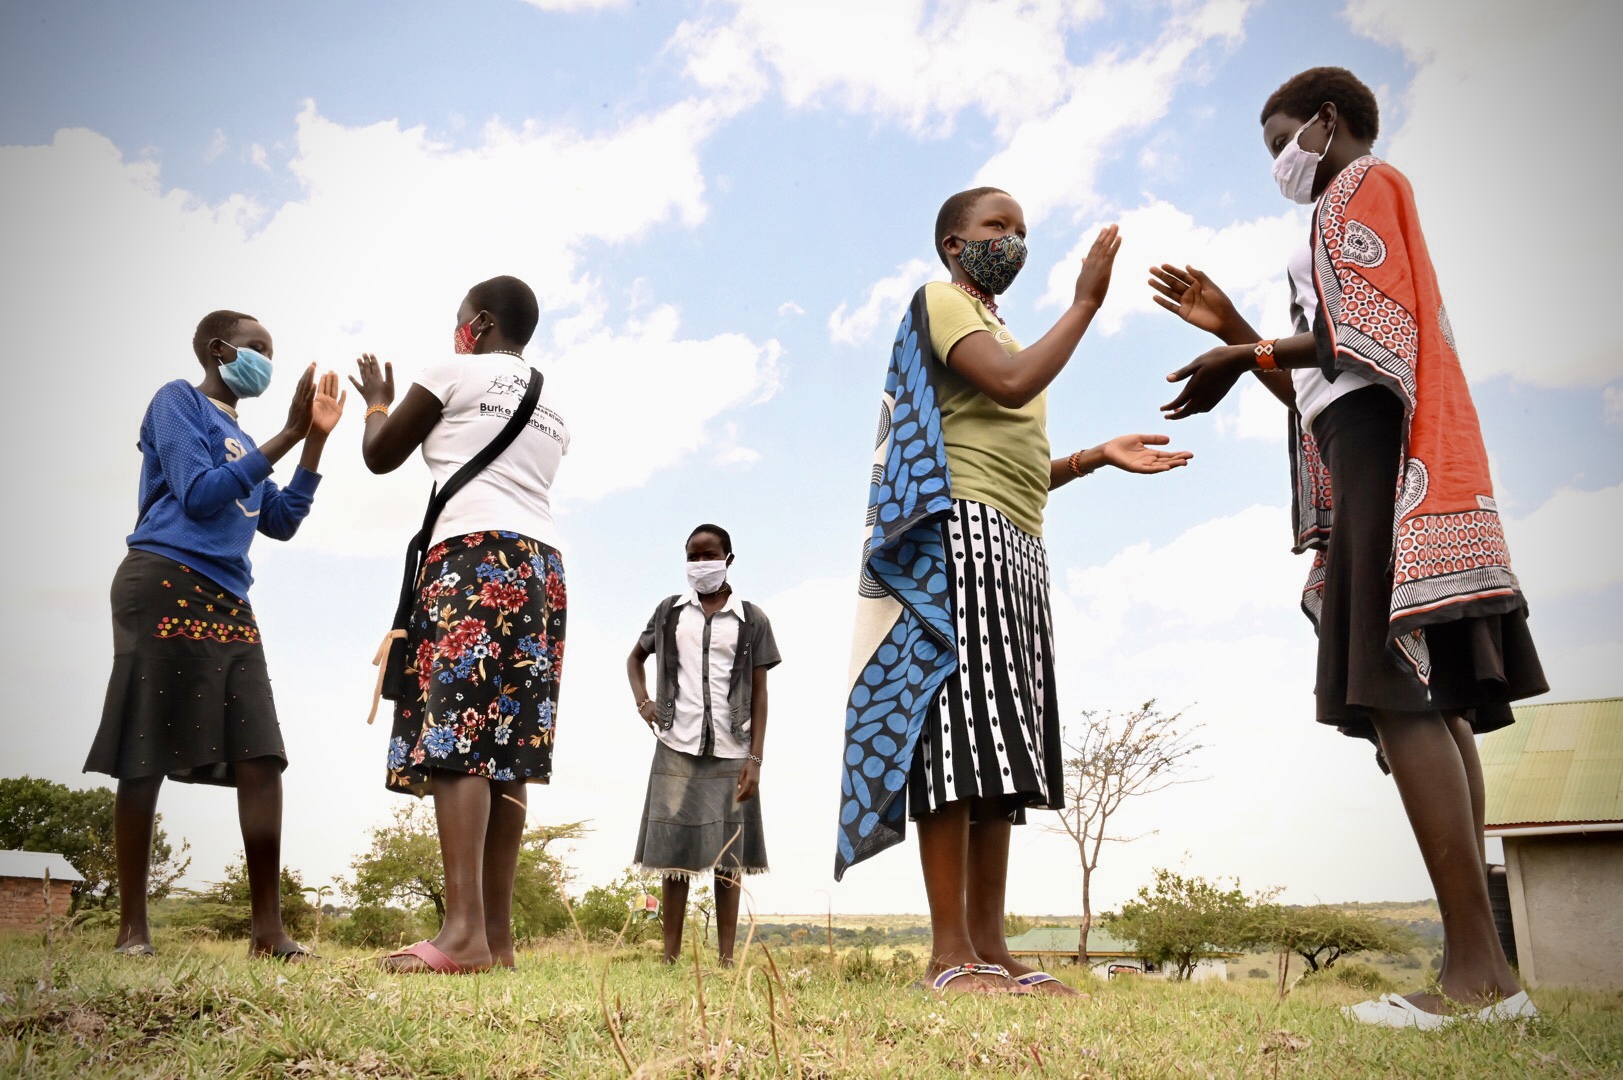 Zipporah and her friends playing at Narok County, Kenya.